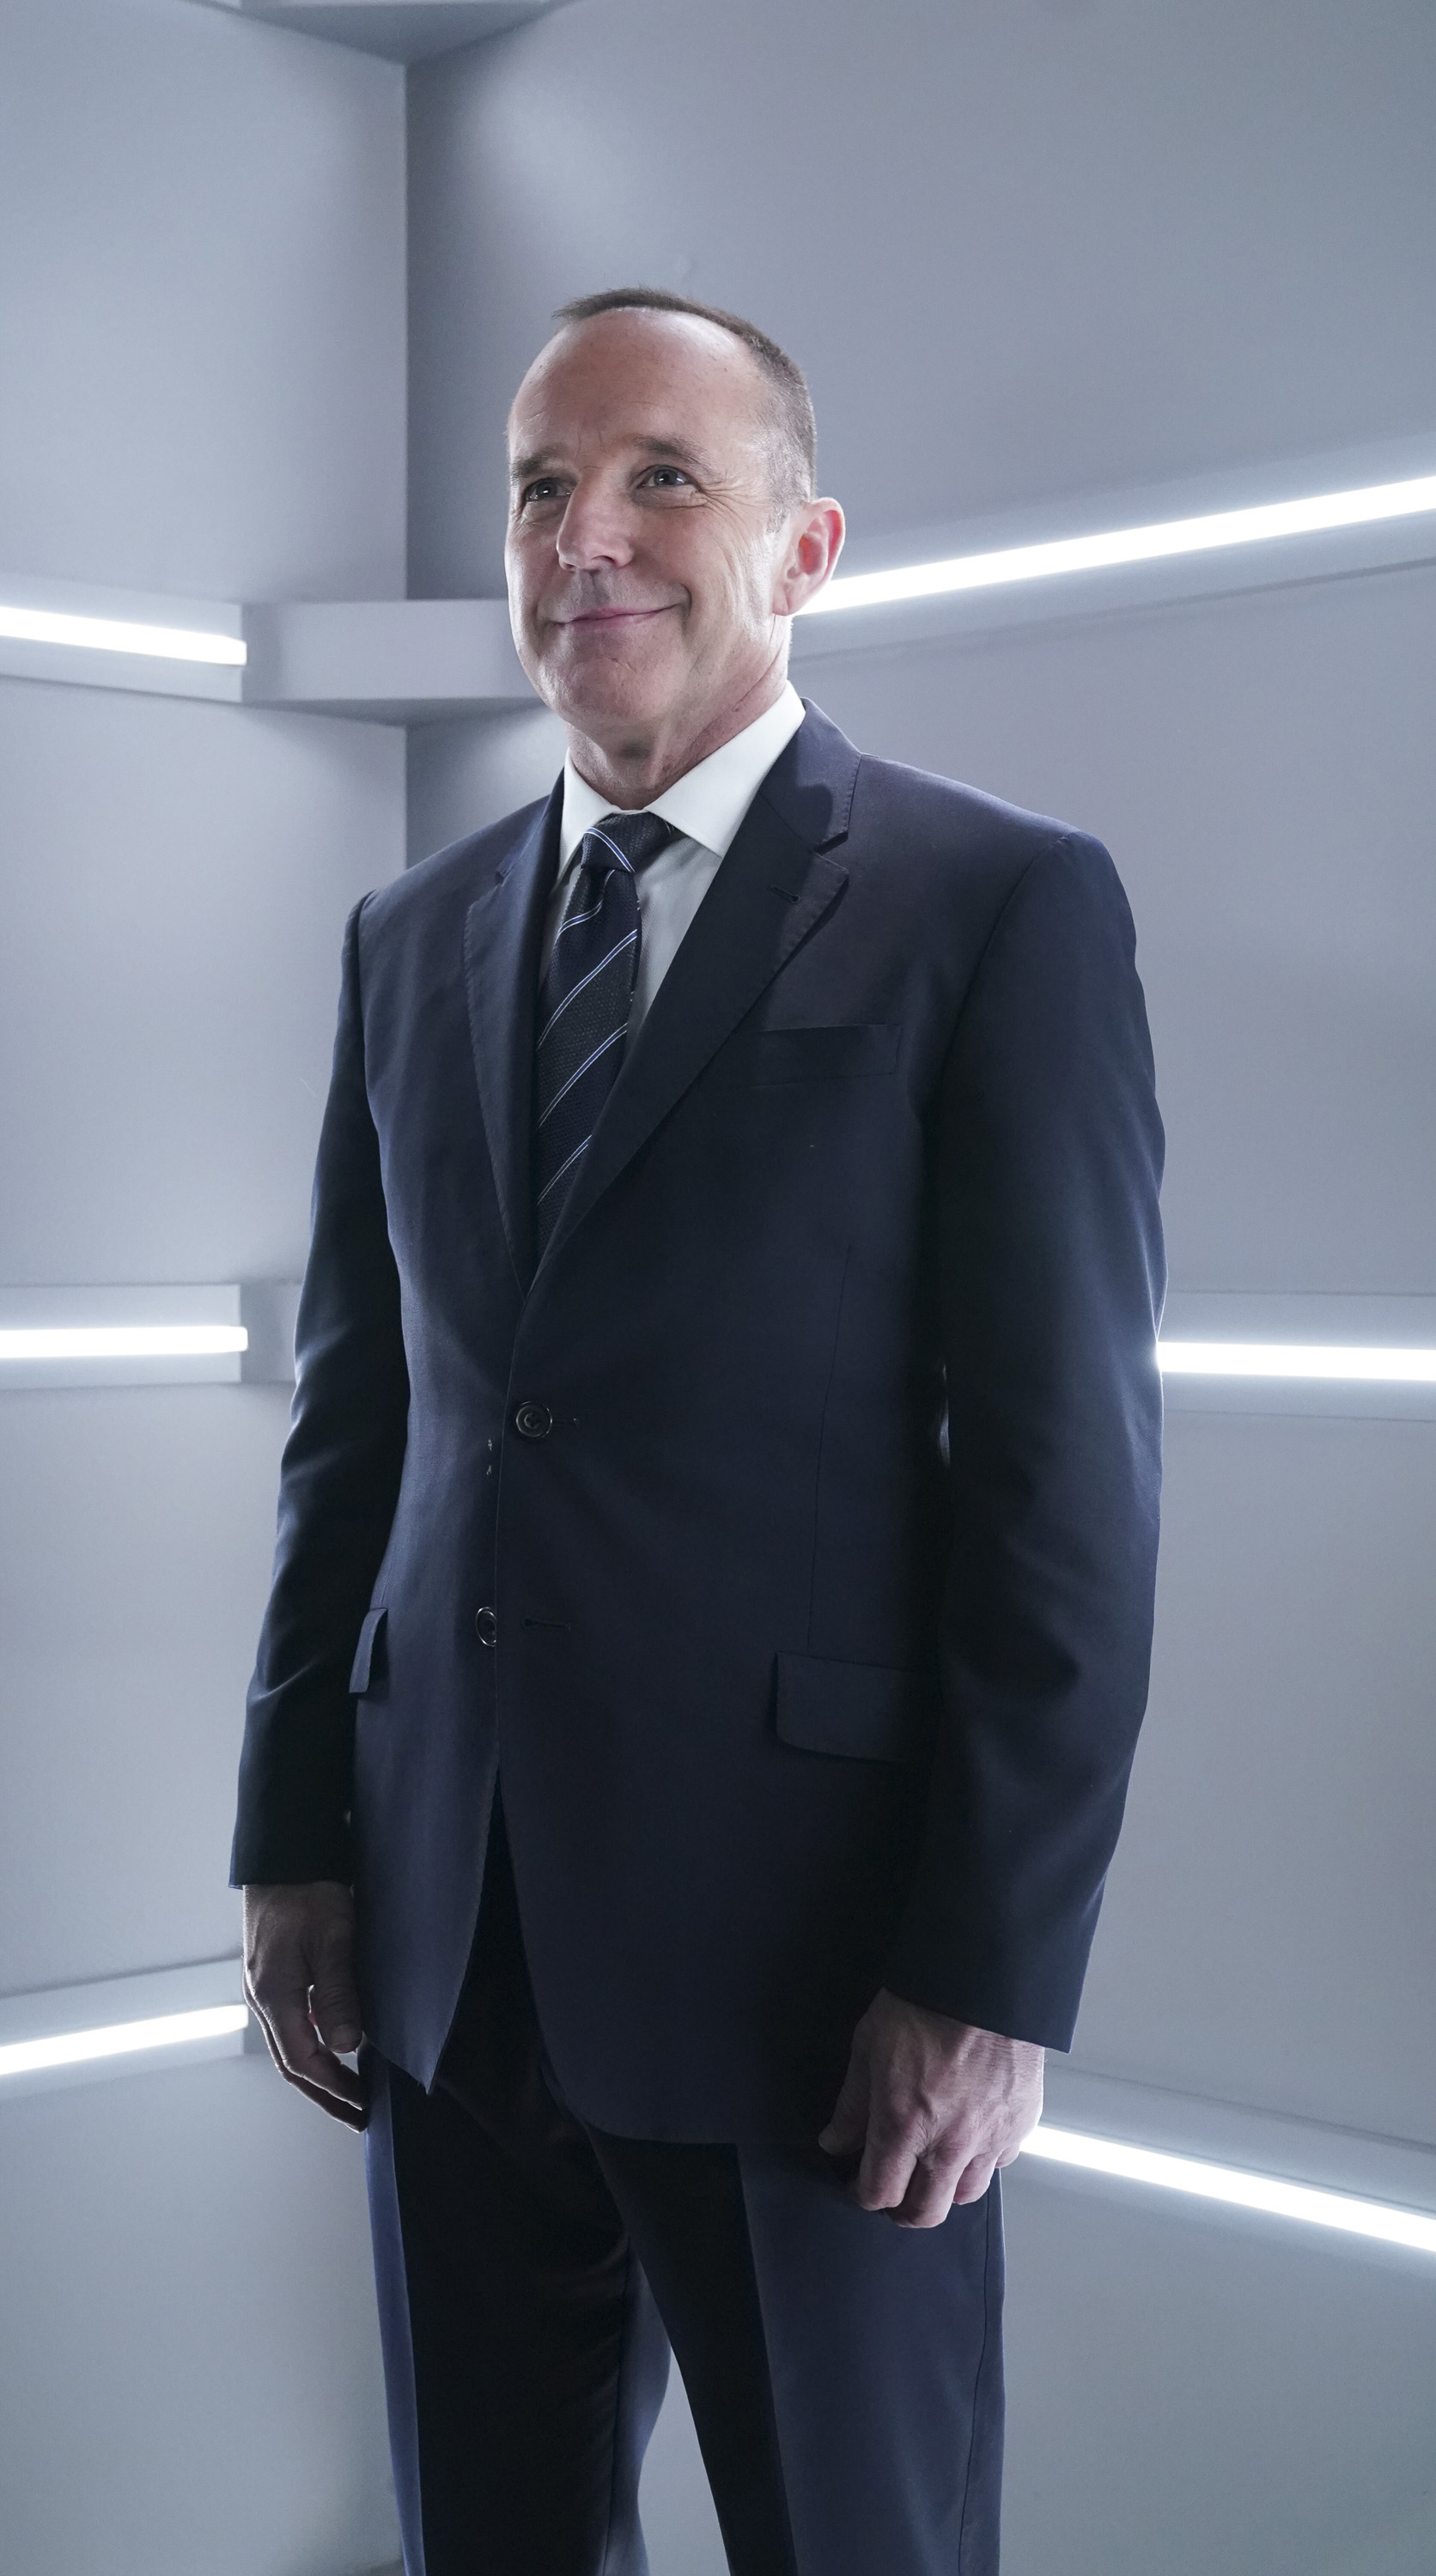 Agents of S.H.I.E.L.D.'s Phil Coulson: No, That Wasn't Him on the